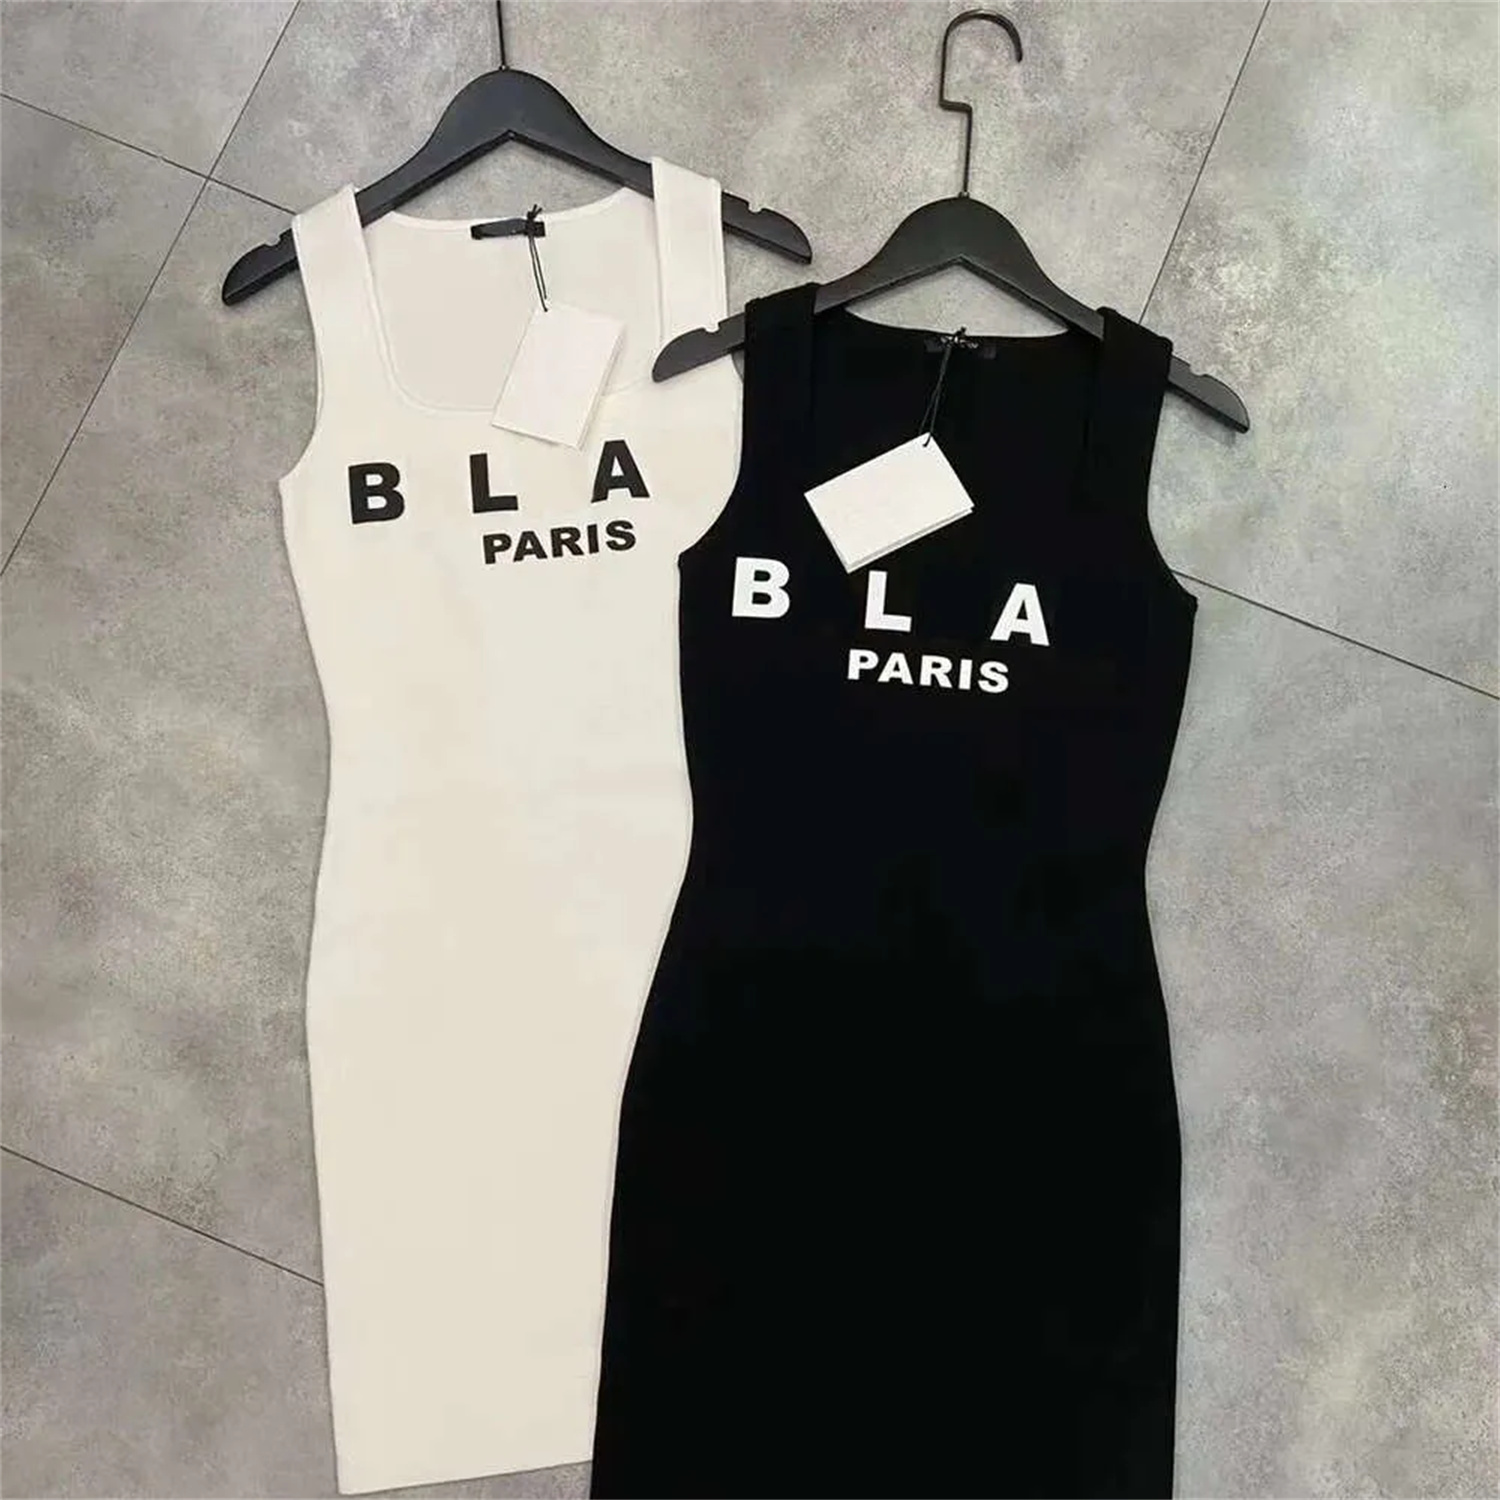 Woman Casual Dresses Sleeveless Blouses Summer Womens Dress Camisole Skirt Outwear Slim Budge Designer Lady Sexy Dresses Streetwear Party Club Clothing